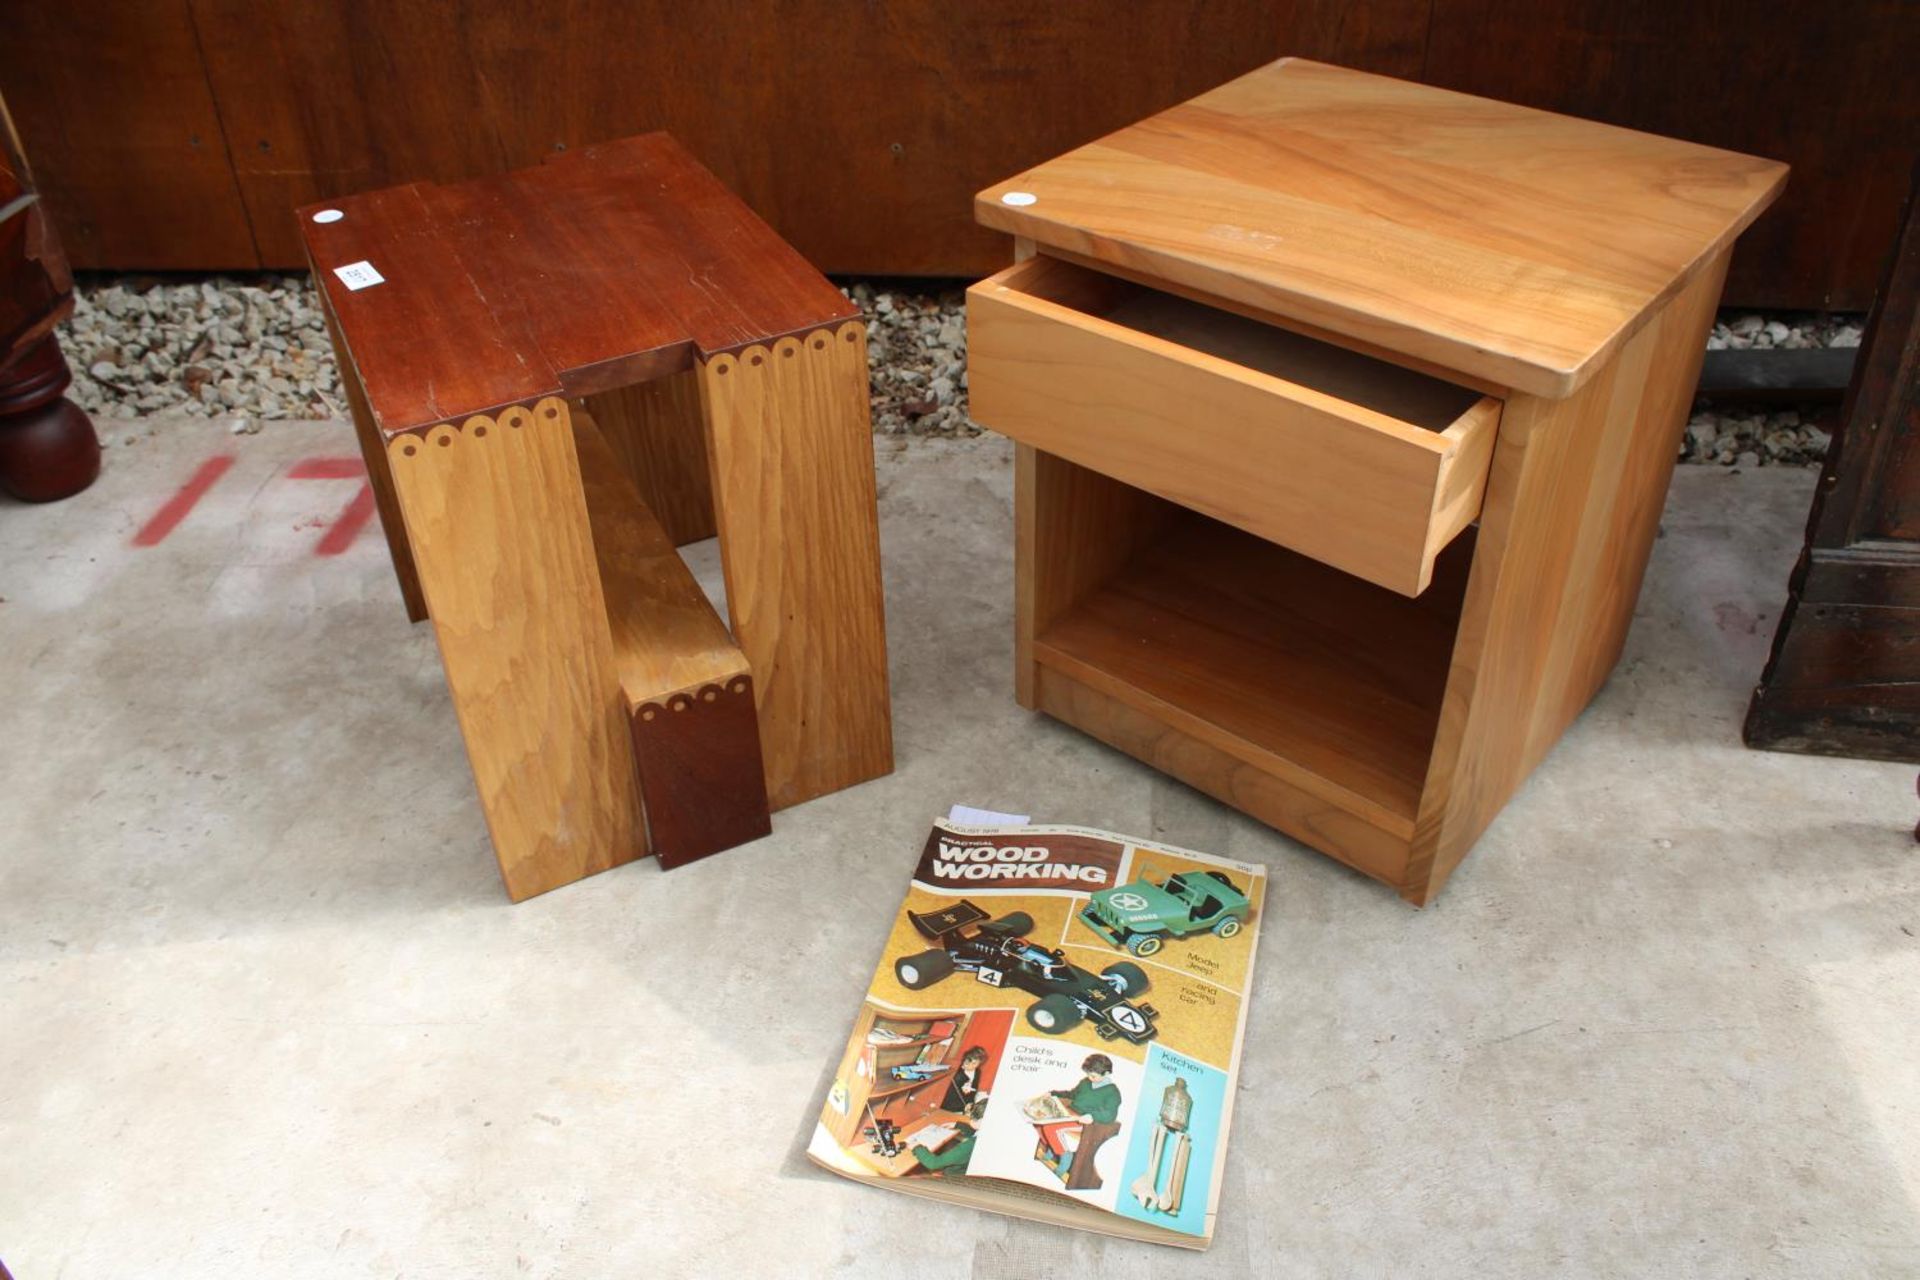 A BEECH AND MAHOGANY GORDON WARR STOOL, SEE ARTICLE IN 1983 WOOD WORKING MAGAZINE AND A SIMILAR LAMP